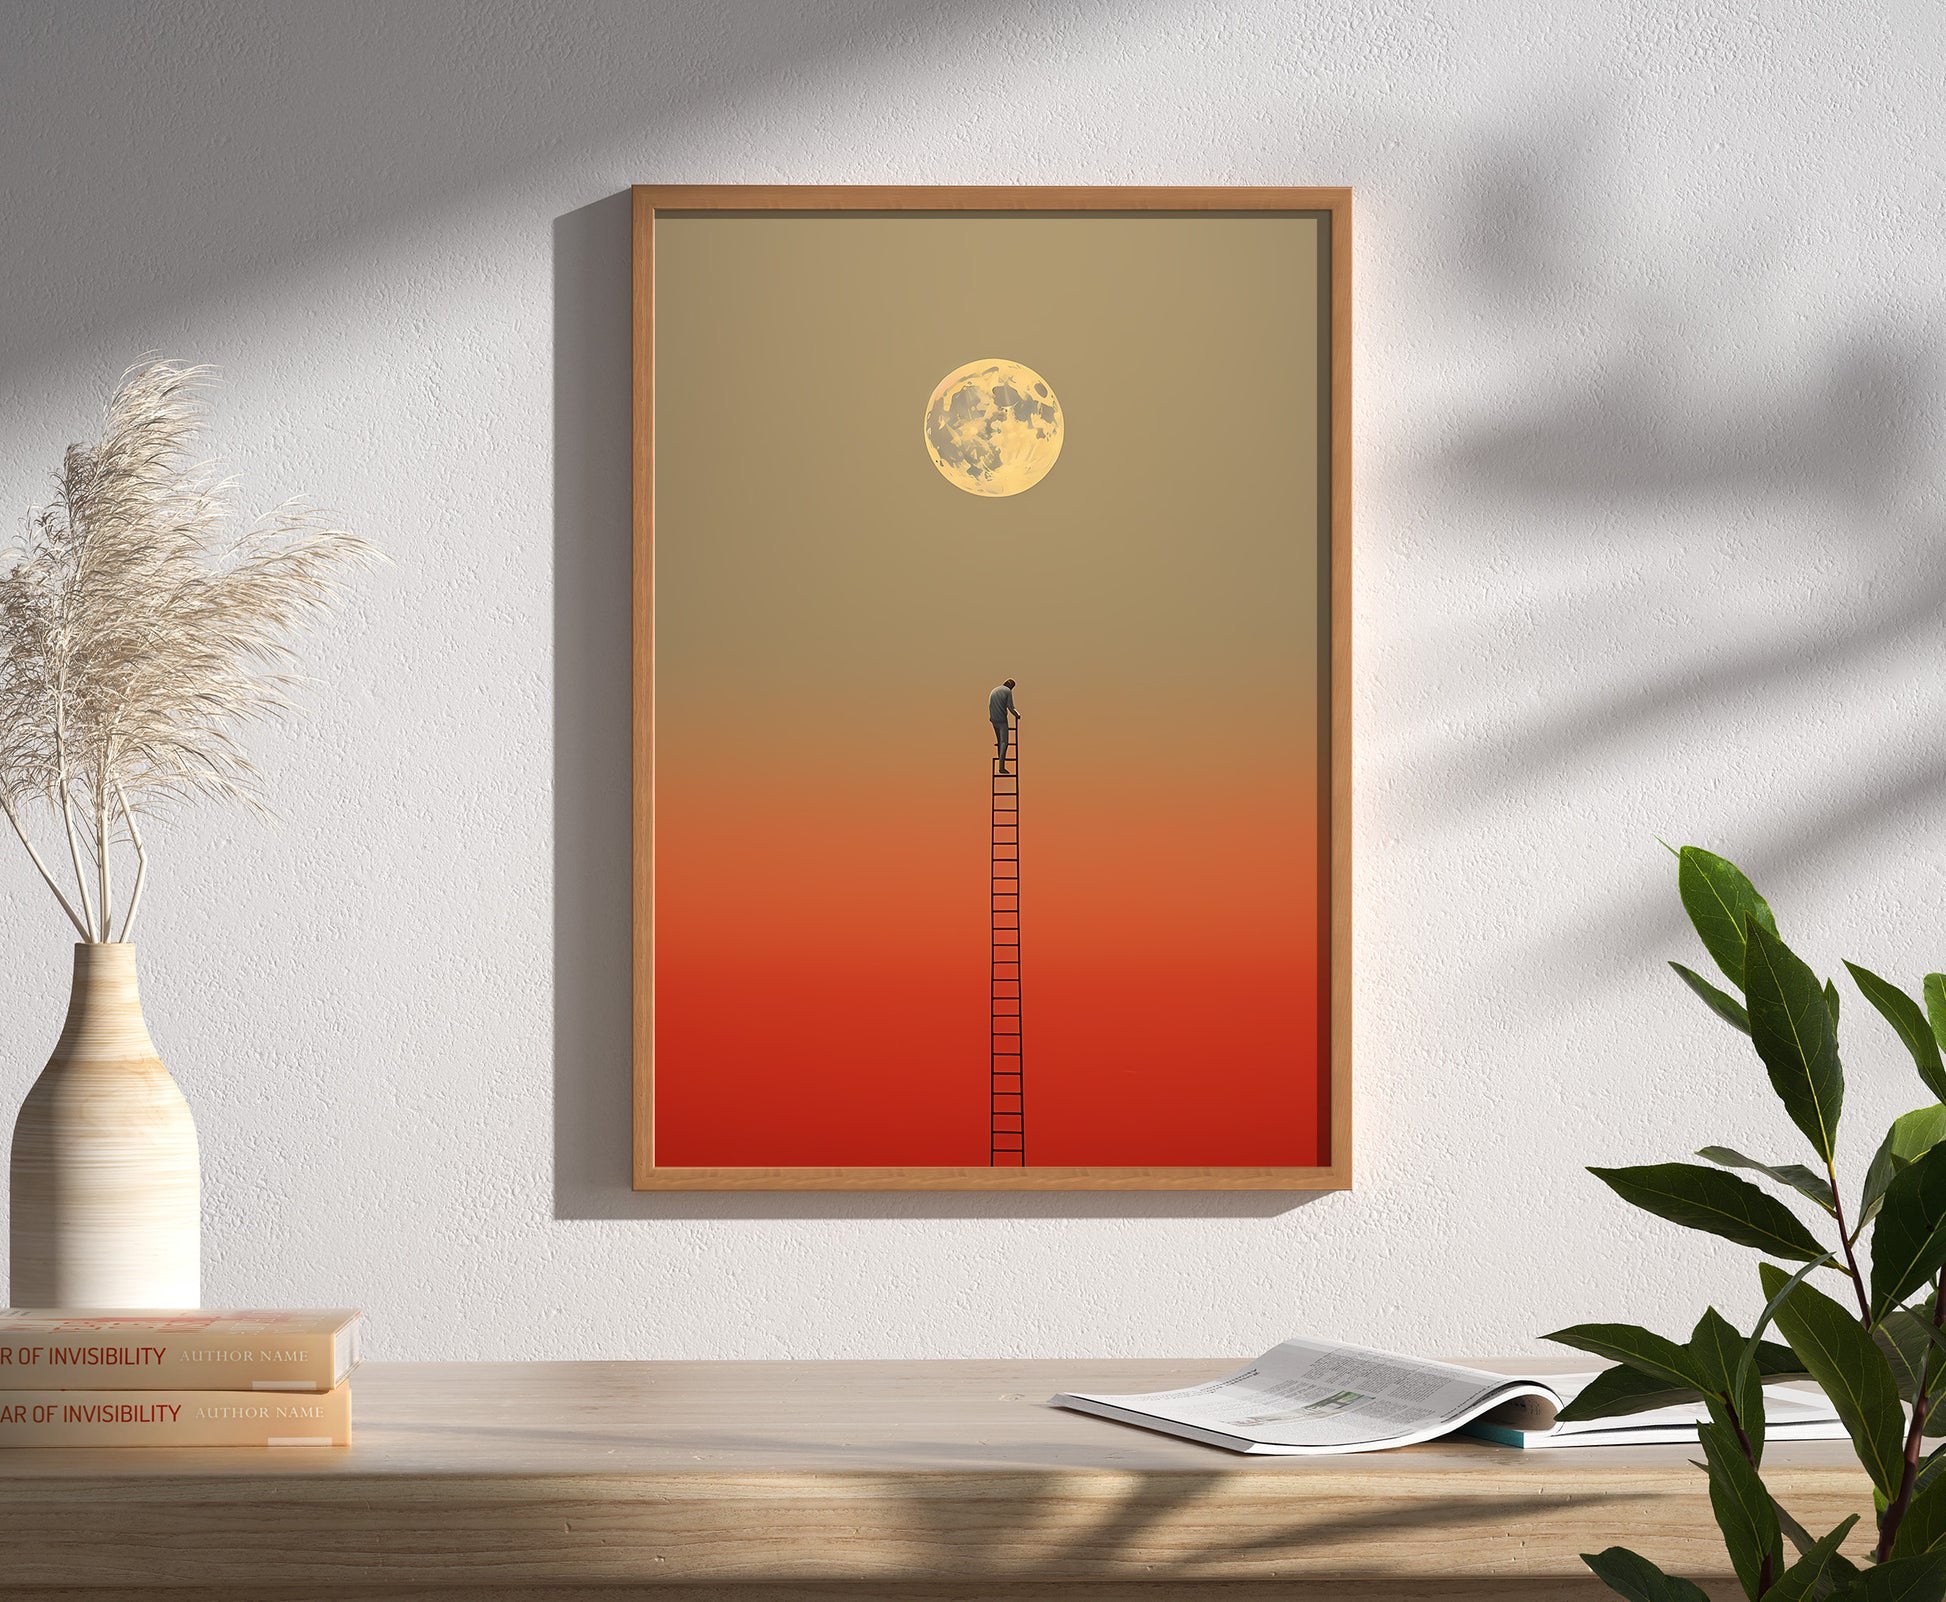 A surreal art poster of a person on a ladder reaching for the moon on a wall.